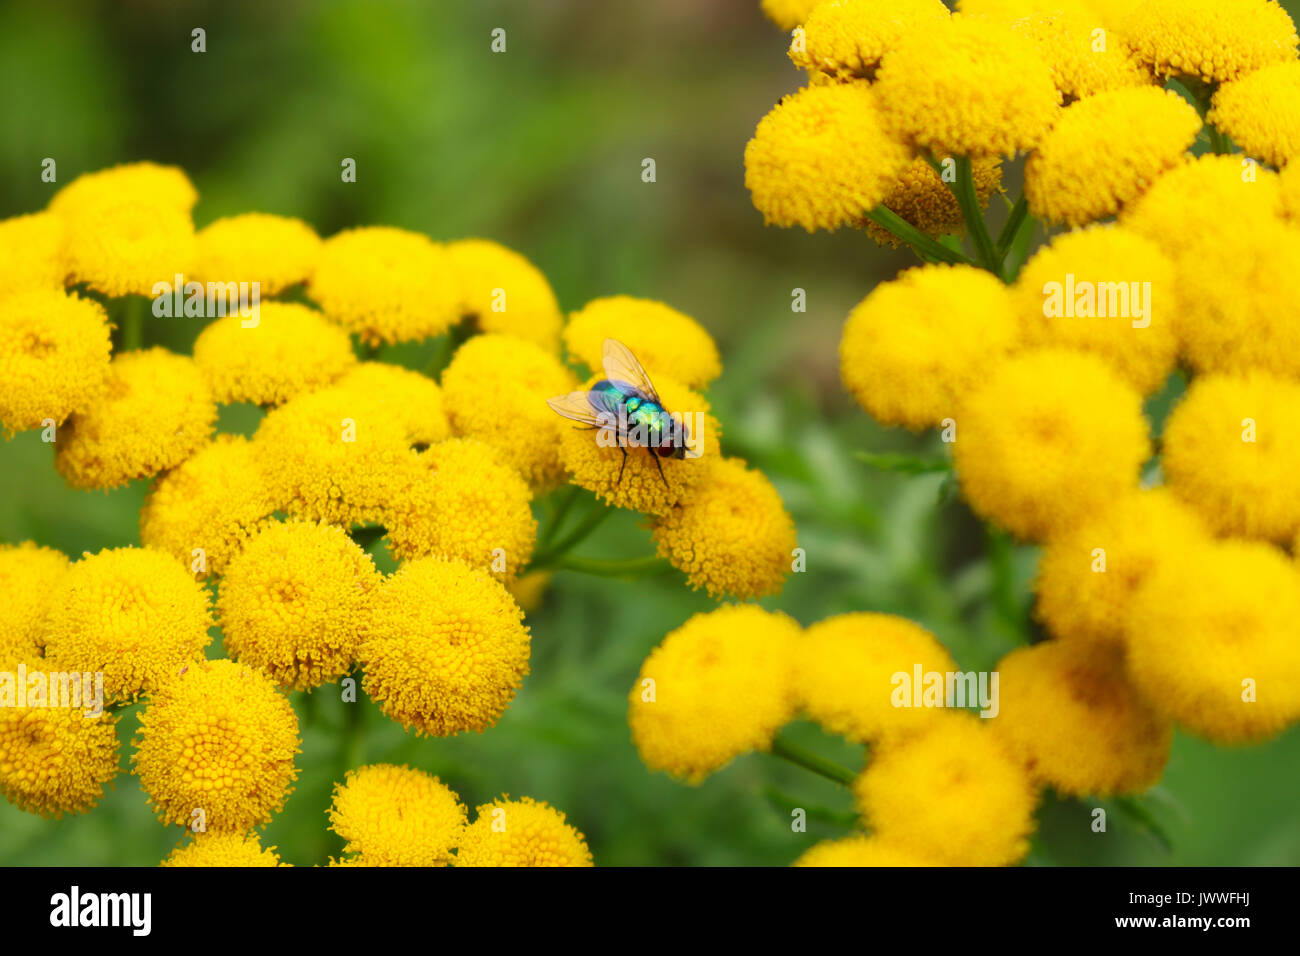 shiny metallic green blow fly sitting on yellow tansy flowers Stock Photo